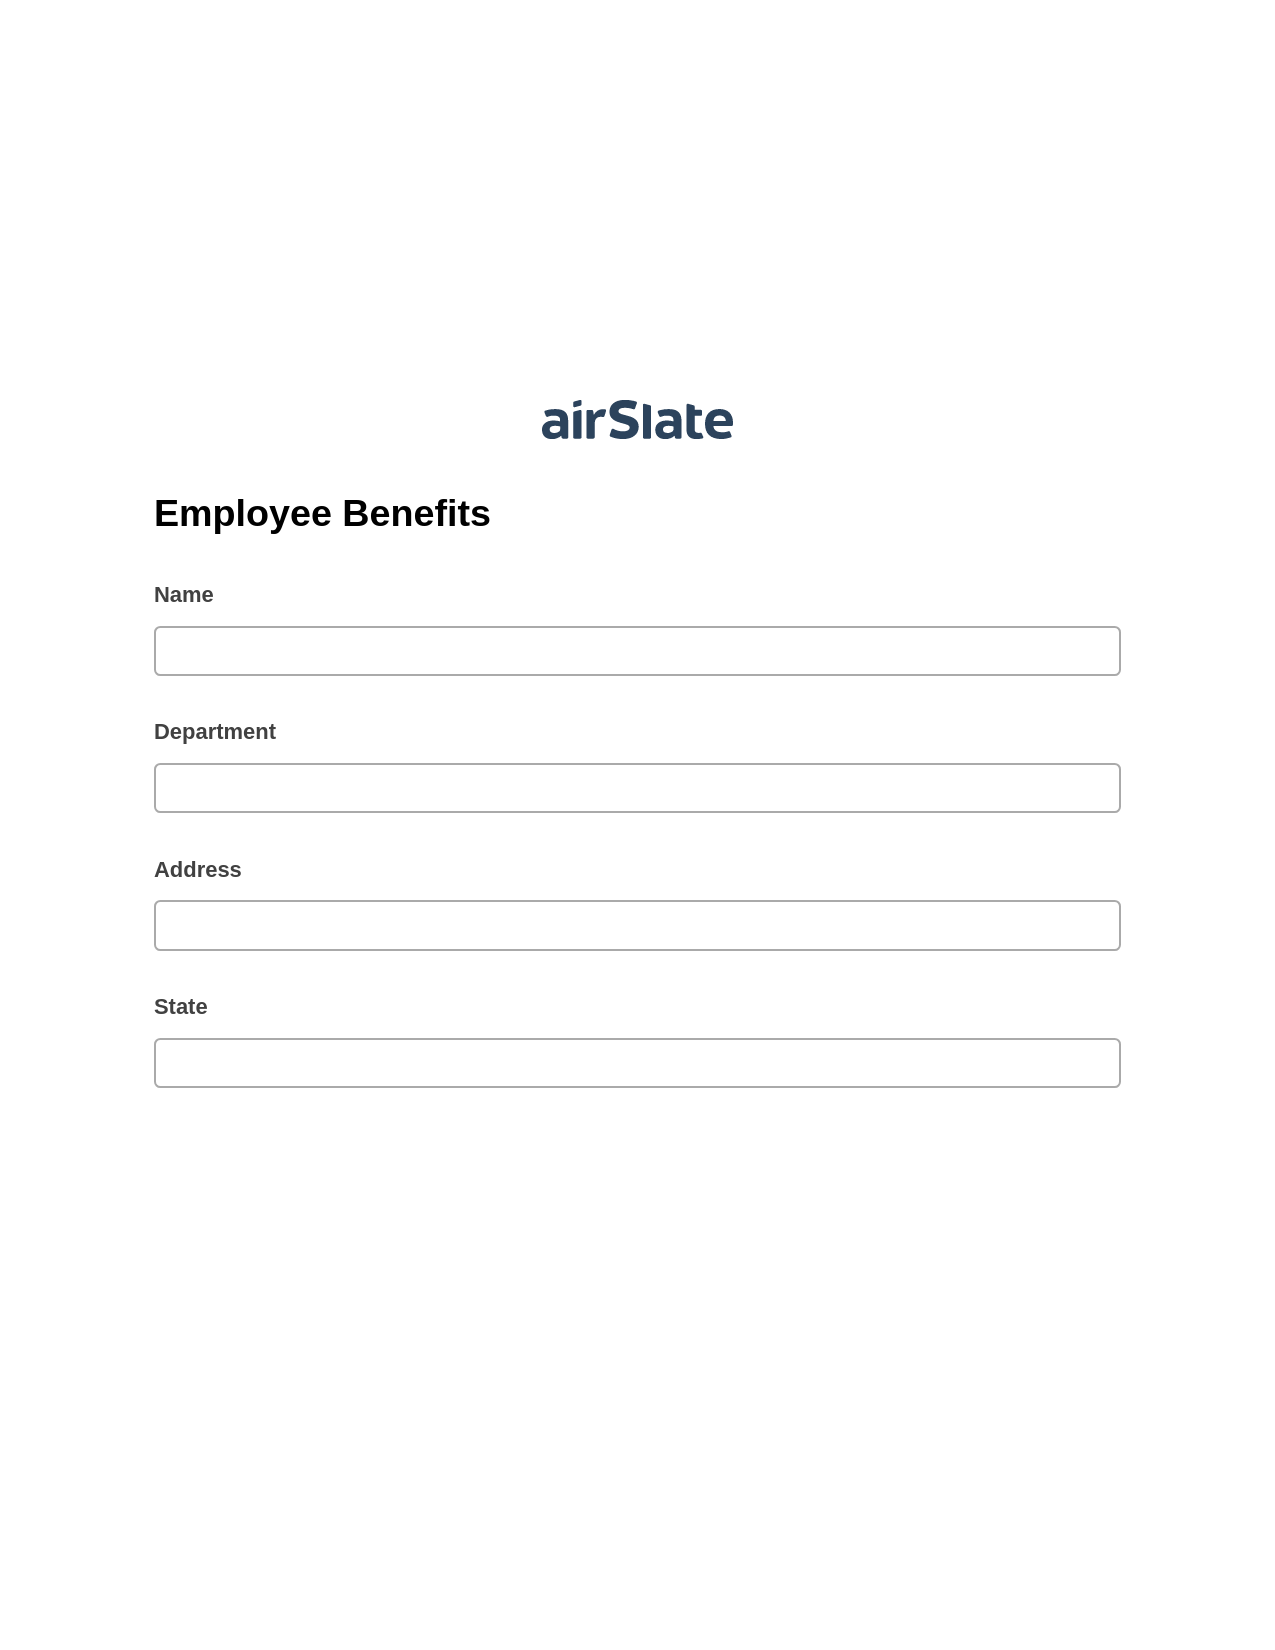 Employee Benefits Pre-fill from another Slate Bot, Document Hide Bot, Export to Formstack Documents Bot